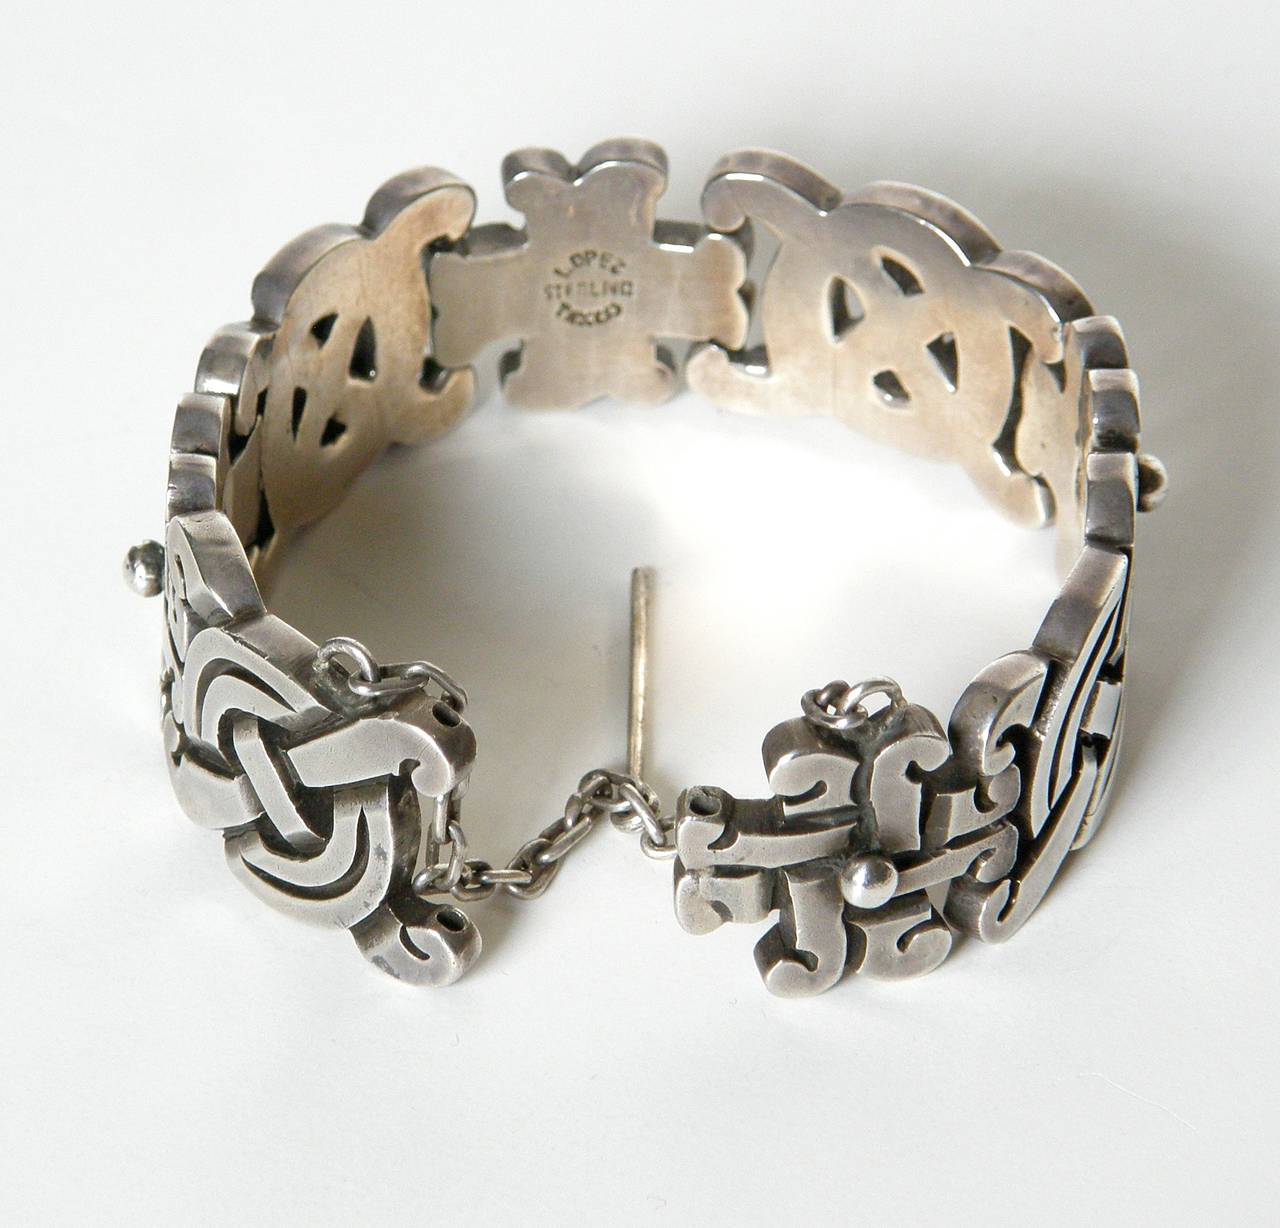 Heavy sterling link bracelet designed by Gerardo Lopez of Taxco, Mexico. The thick links have designs inspired by pre-Columbian motifs. The bracelet has a pin on a chain that slides through the two end links to form a closure. It has a nice vintage